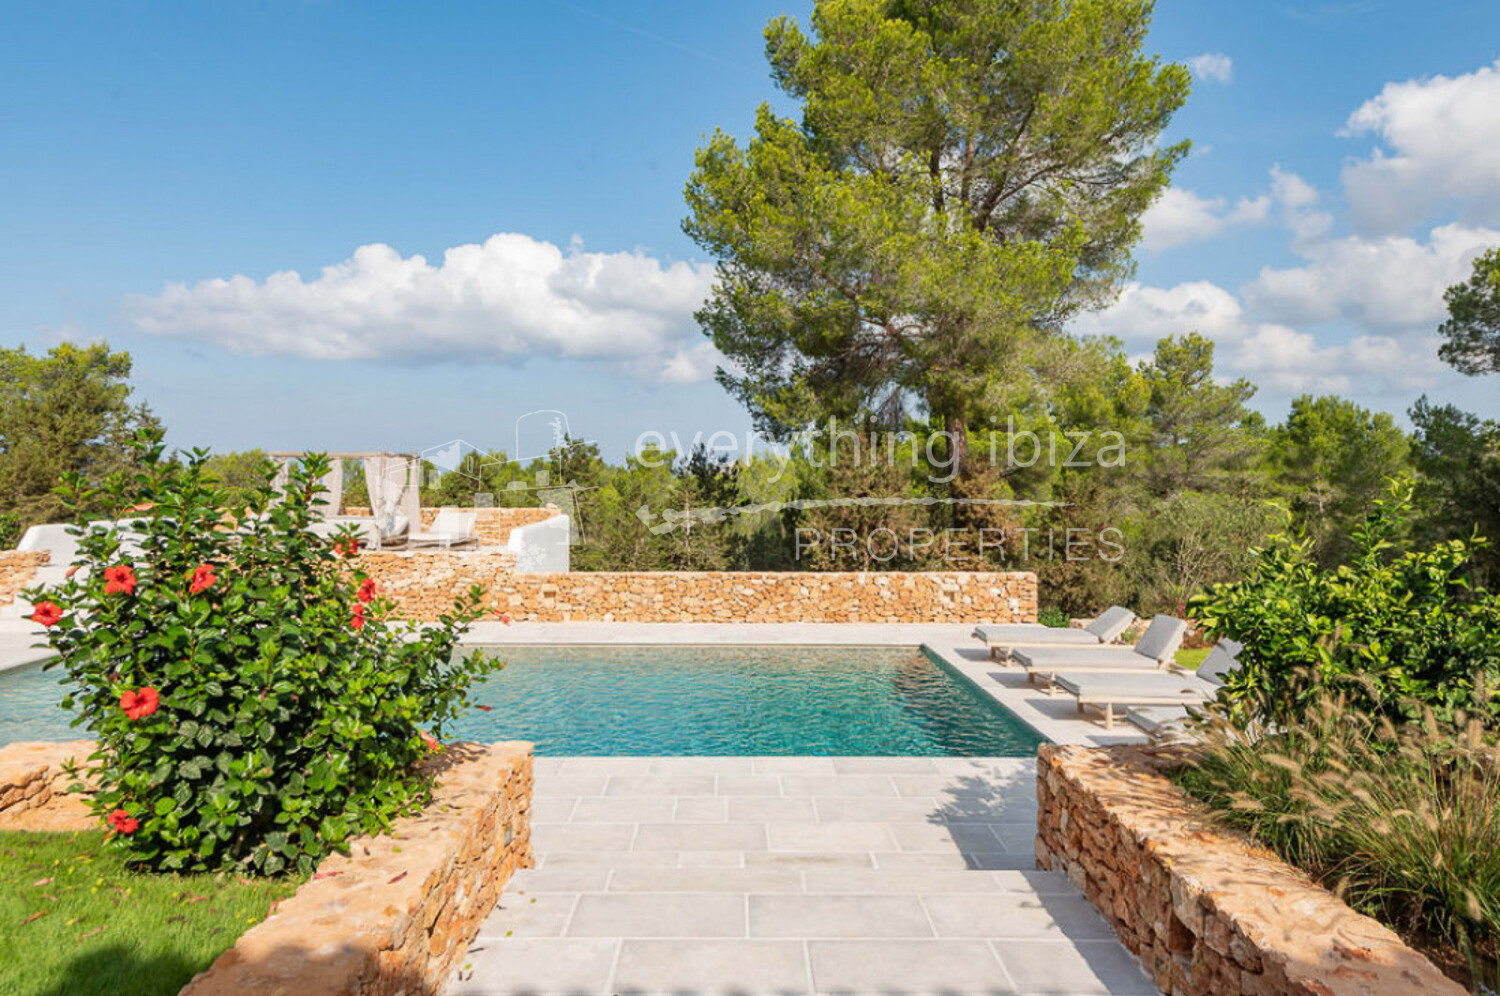 Beautifully Renovated Country House with Sea and Sunset Views, ref. 1655, for sale in Ibiza by everything ibiza Properties